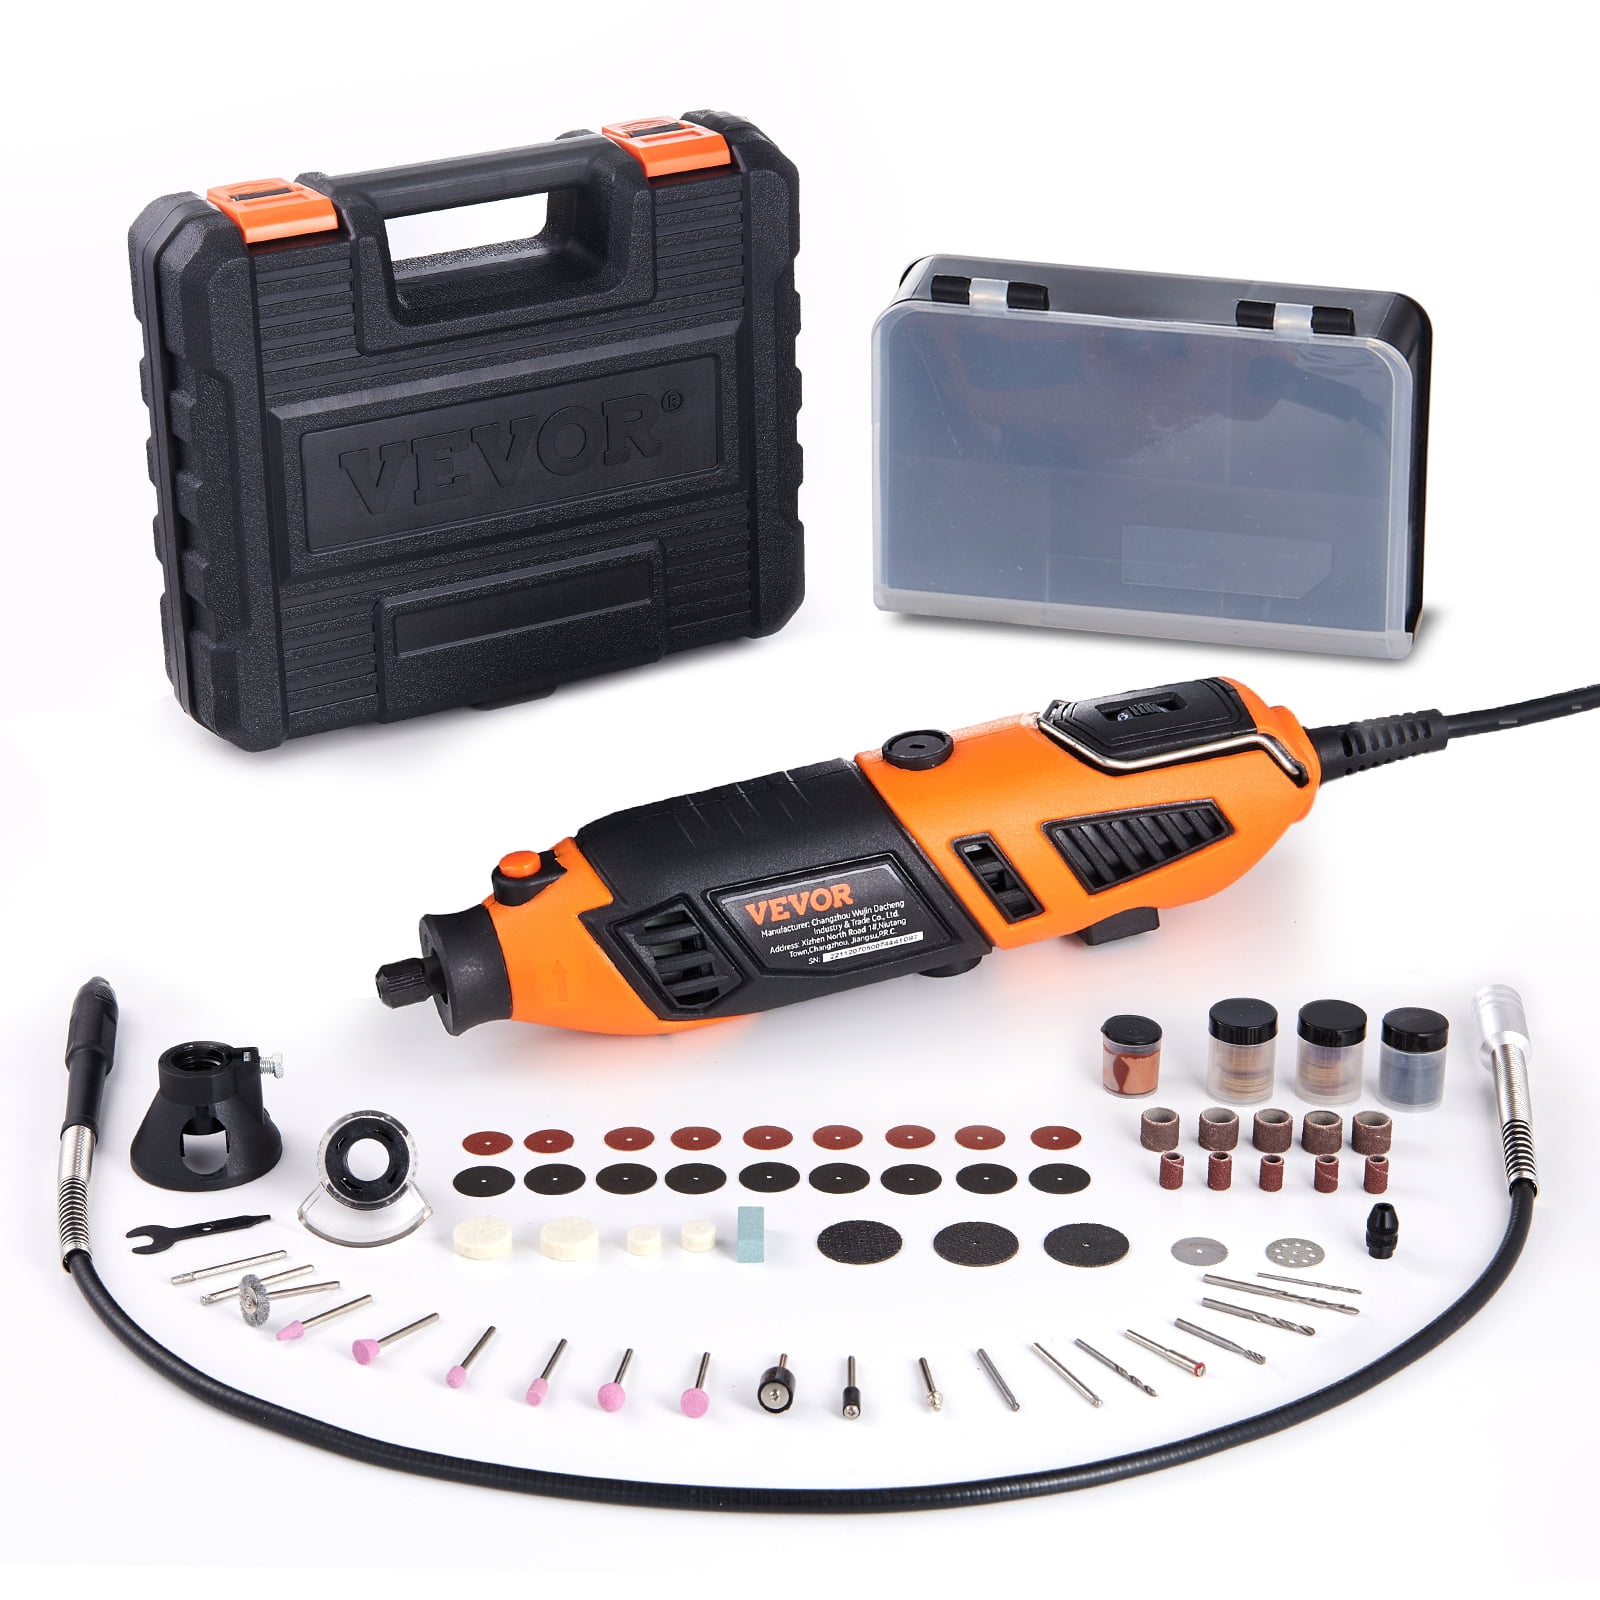 BENTISIM Rotary Tool Kit, 8000-35000 RPM Variable Speed Rotary Tool Kit A Universal Chuck, 5-Speed, 186 PCS Accessory Set for Grinding, Sanding, Polishing, Milling, Carving, Cutting and Polishing - Walmart.com